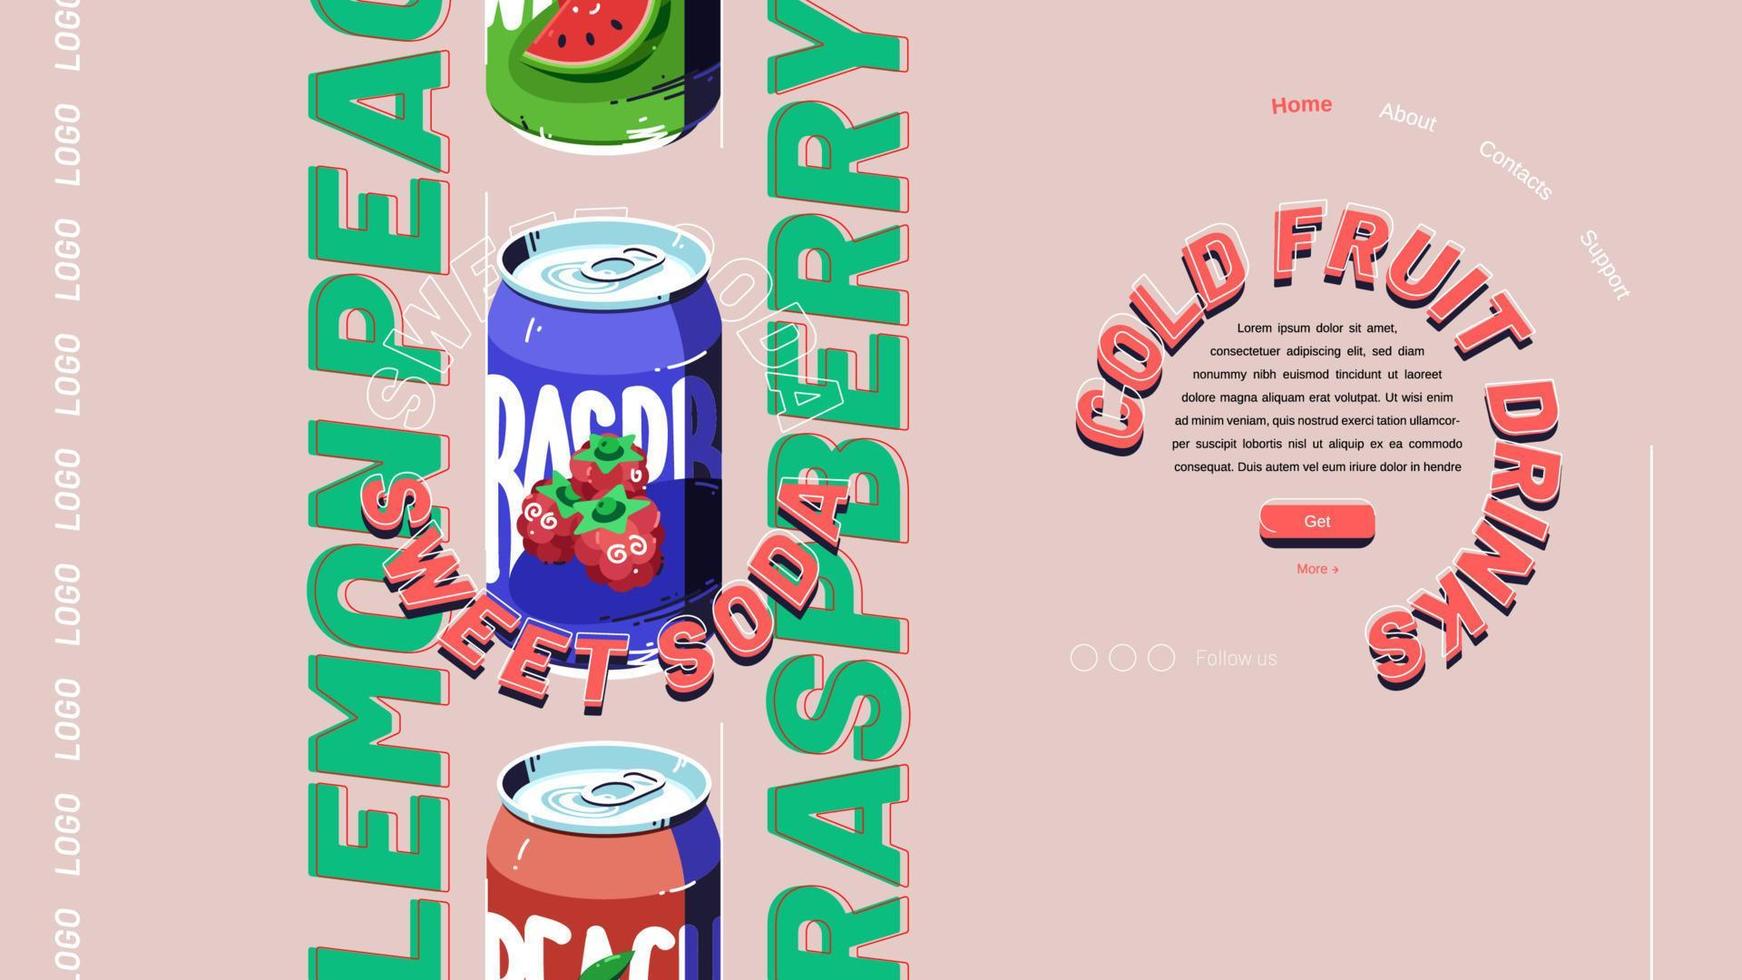 Sweet soda landing page, cold drinks promo ads vector